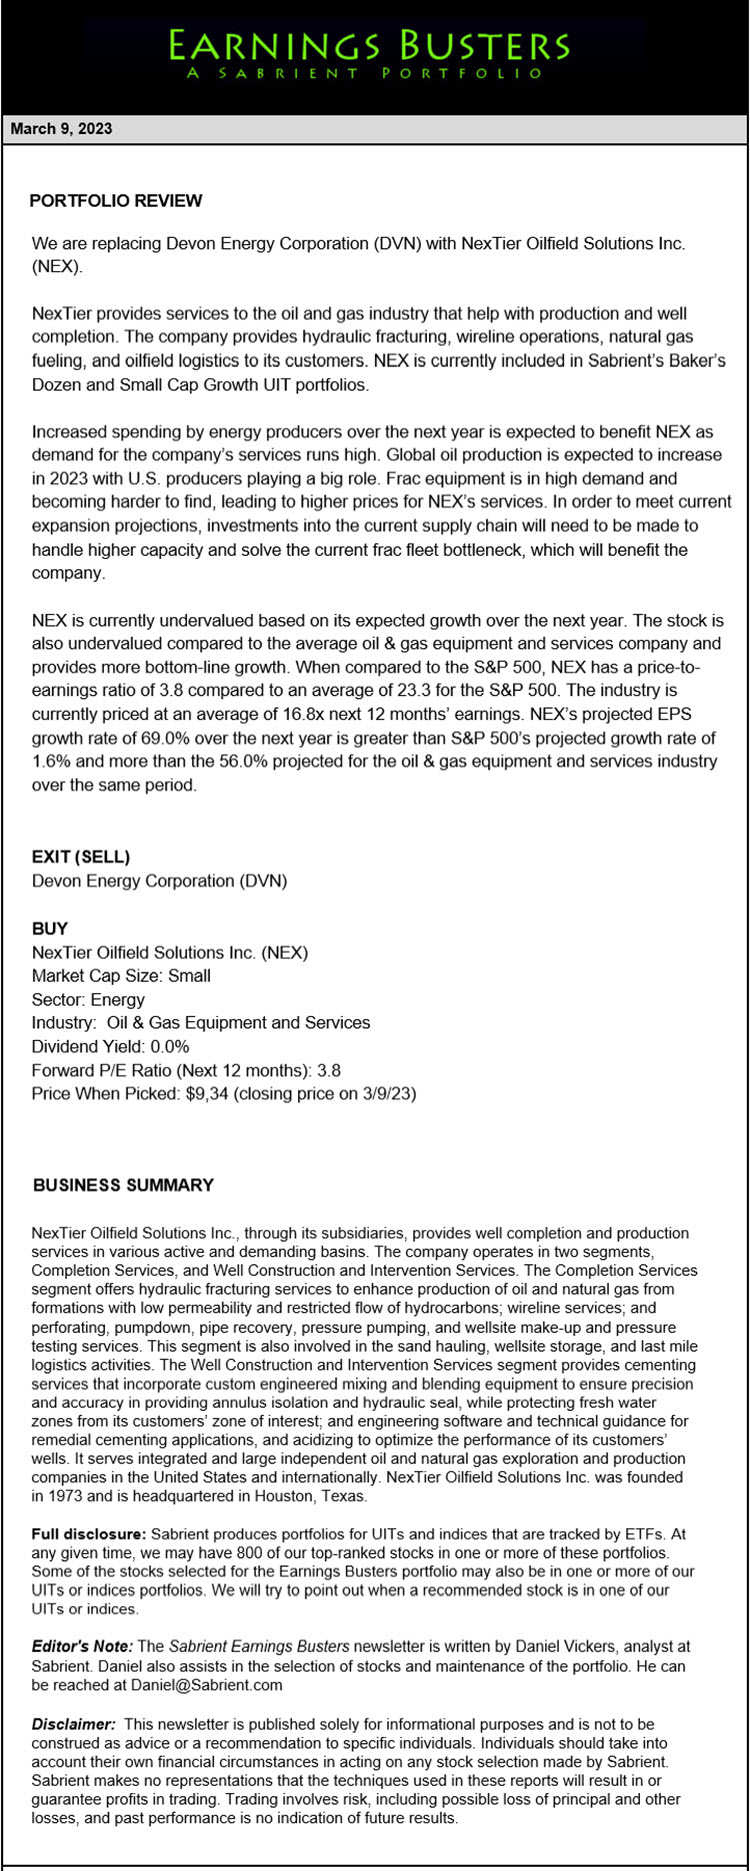 Earnings Busters Newsletter - March 9, 2023